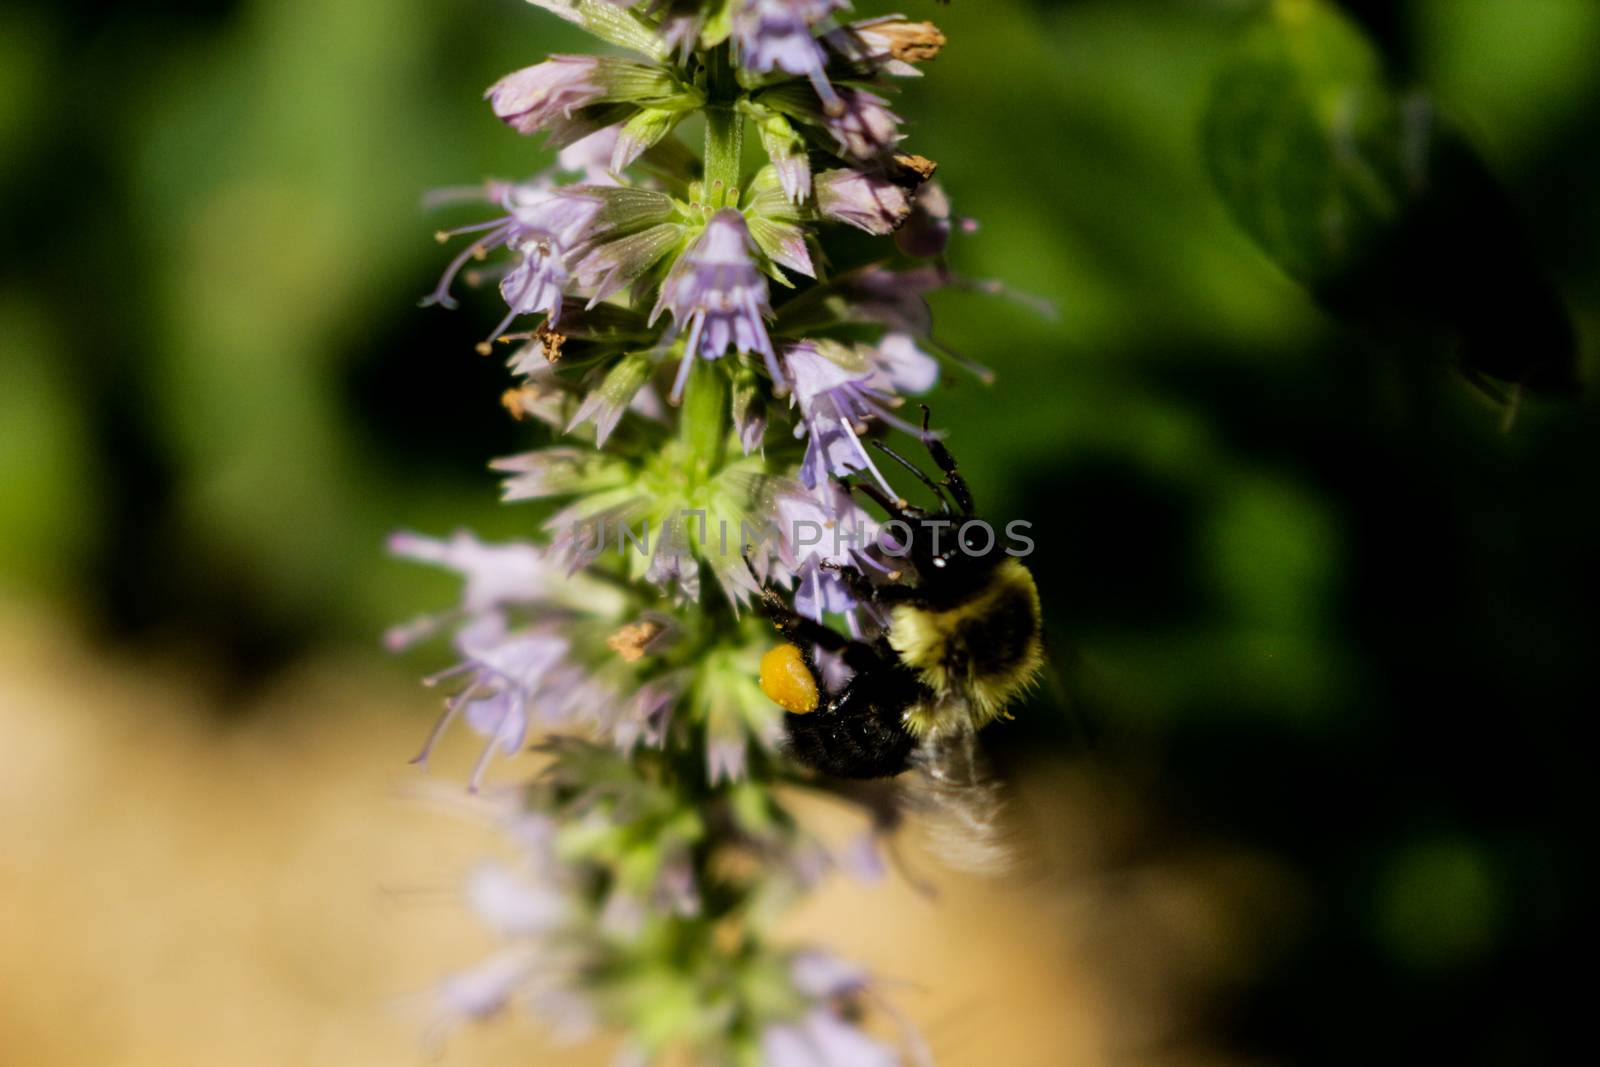 honey bee pollinating a licorice mint plant. Licorice mint is used for medicinal and other teas..